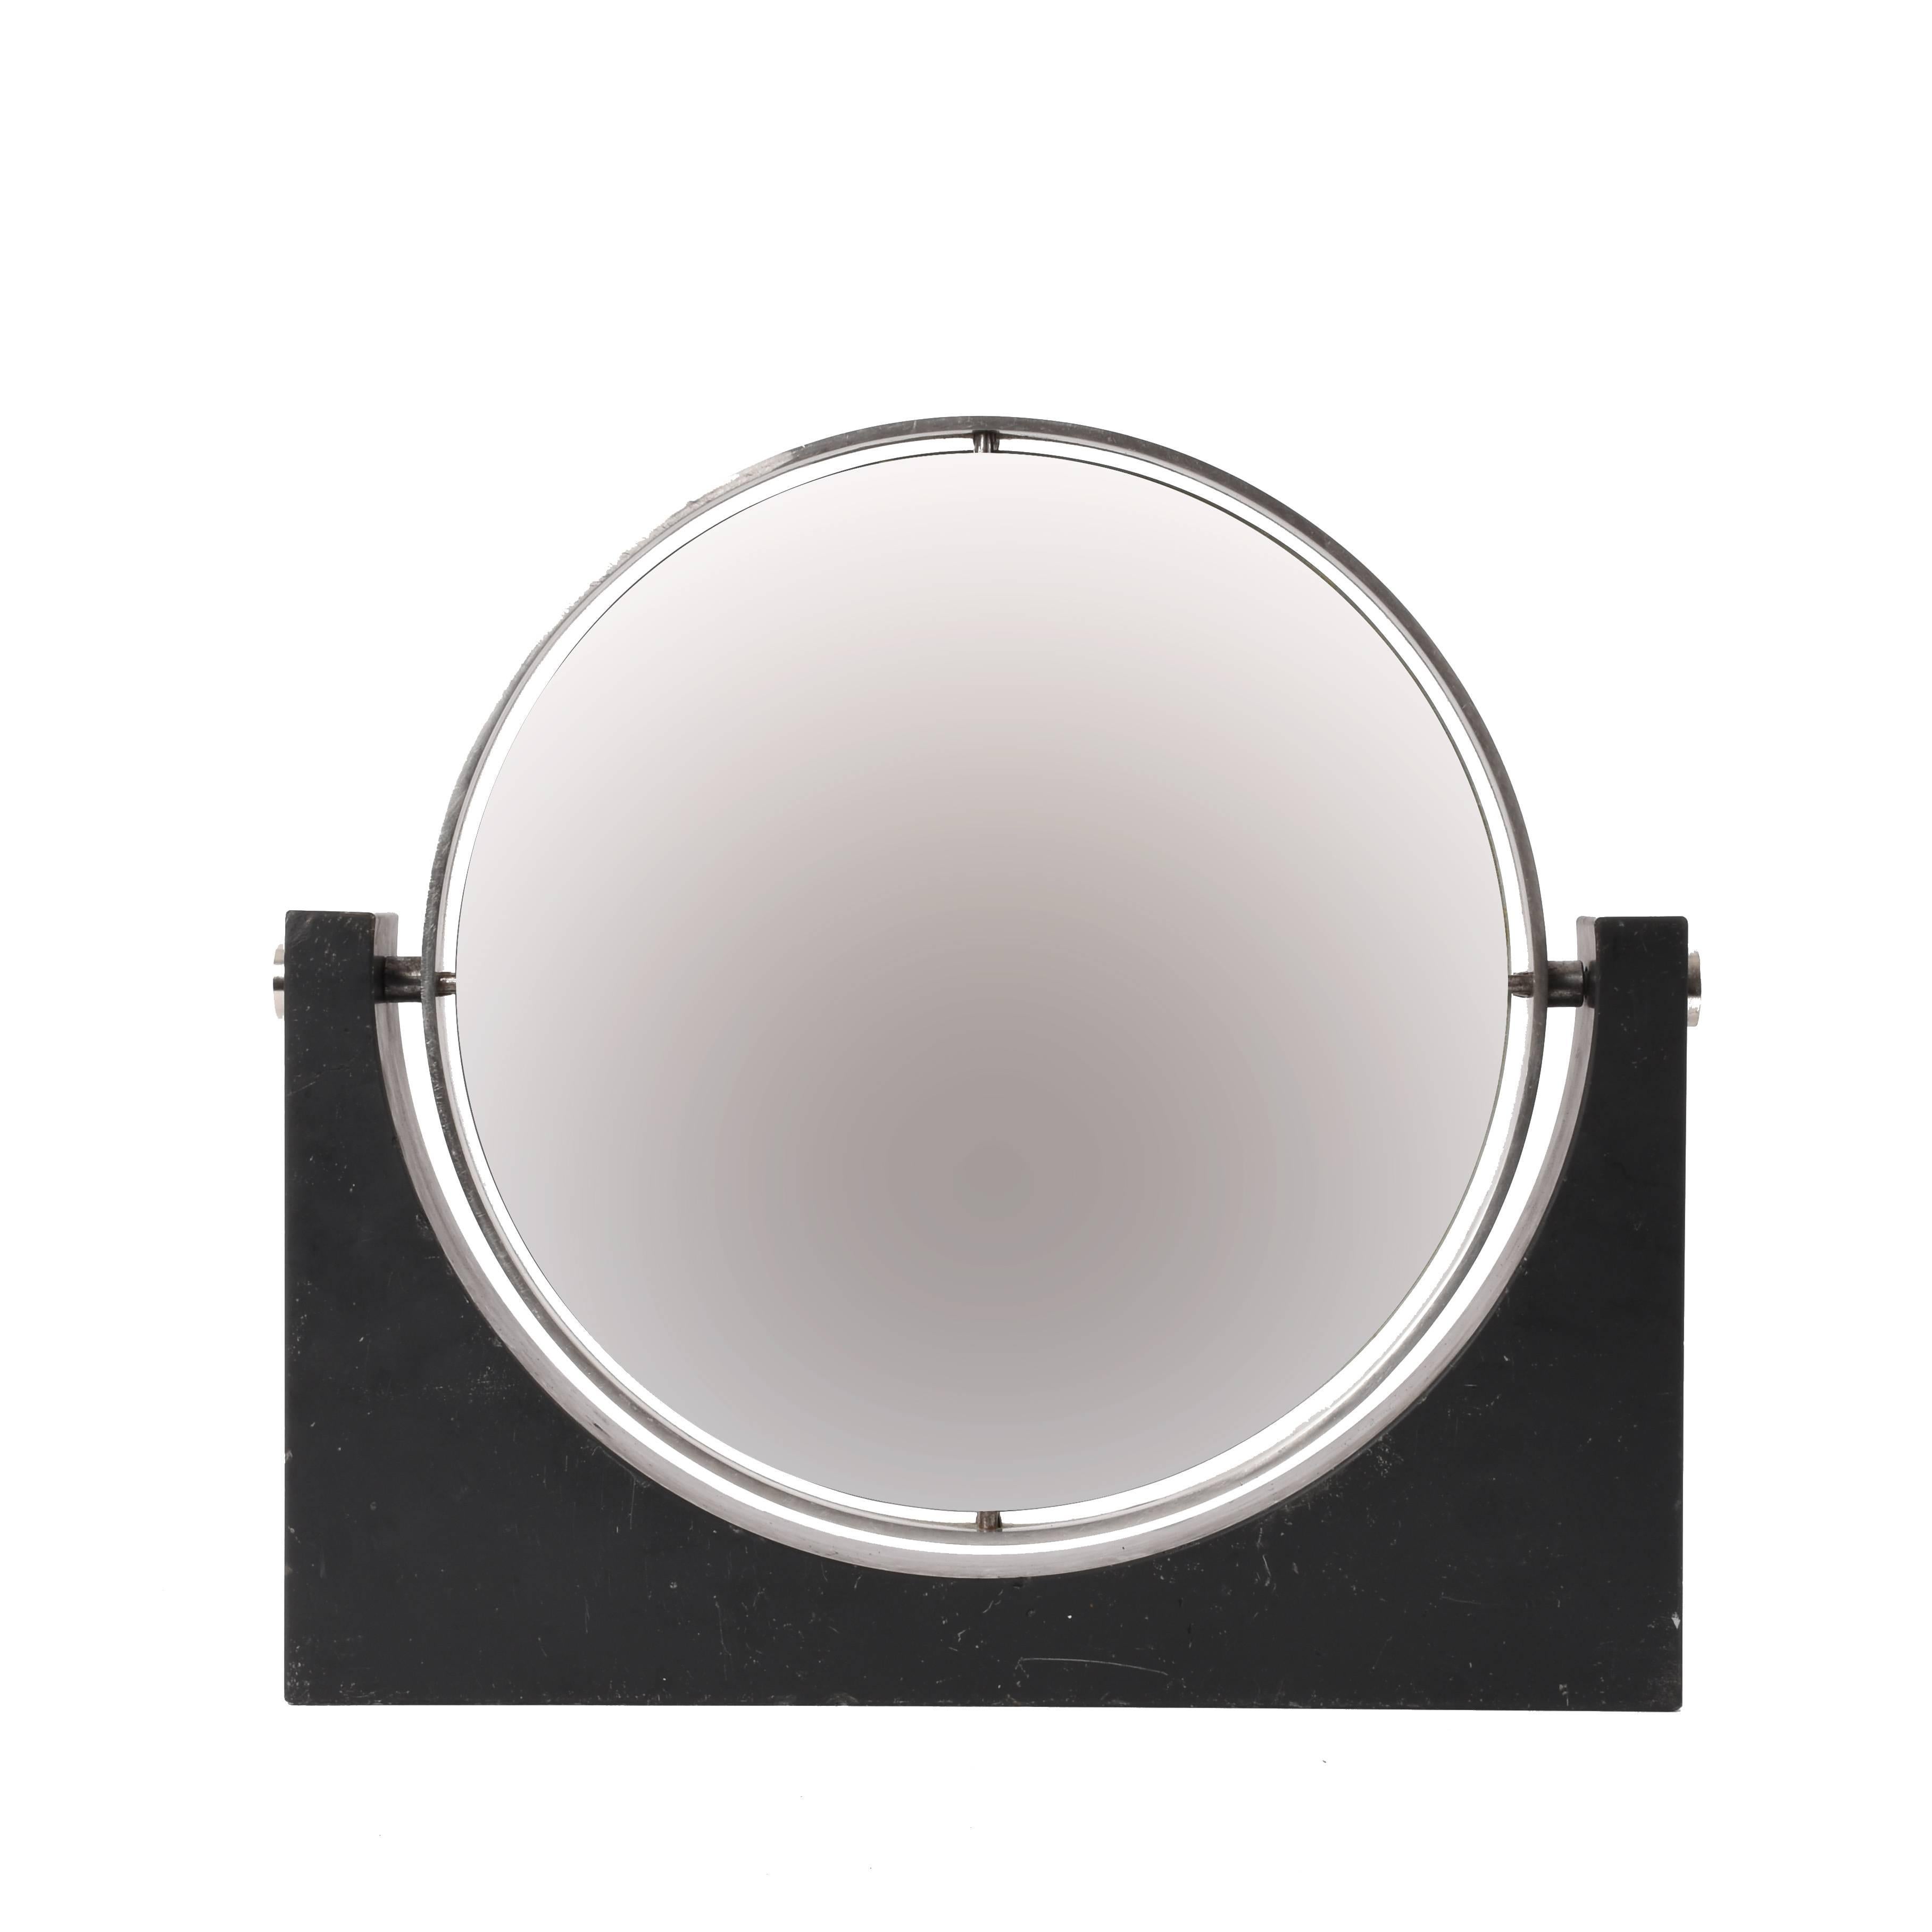 Italian Marble and Steel Vanity Table Mirror Round, Italy, 1960s by Mangiarotti 1